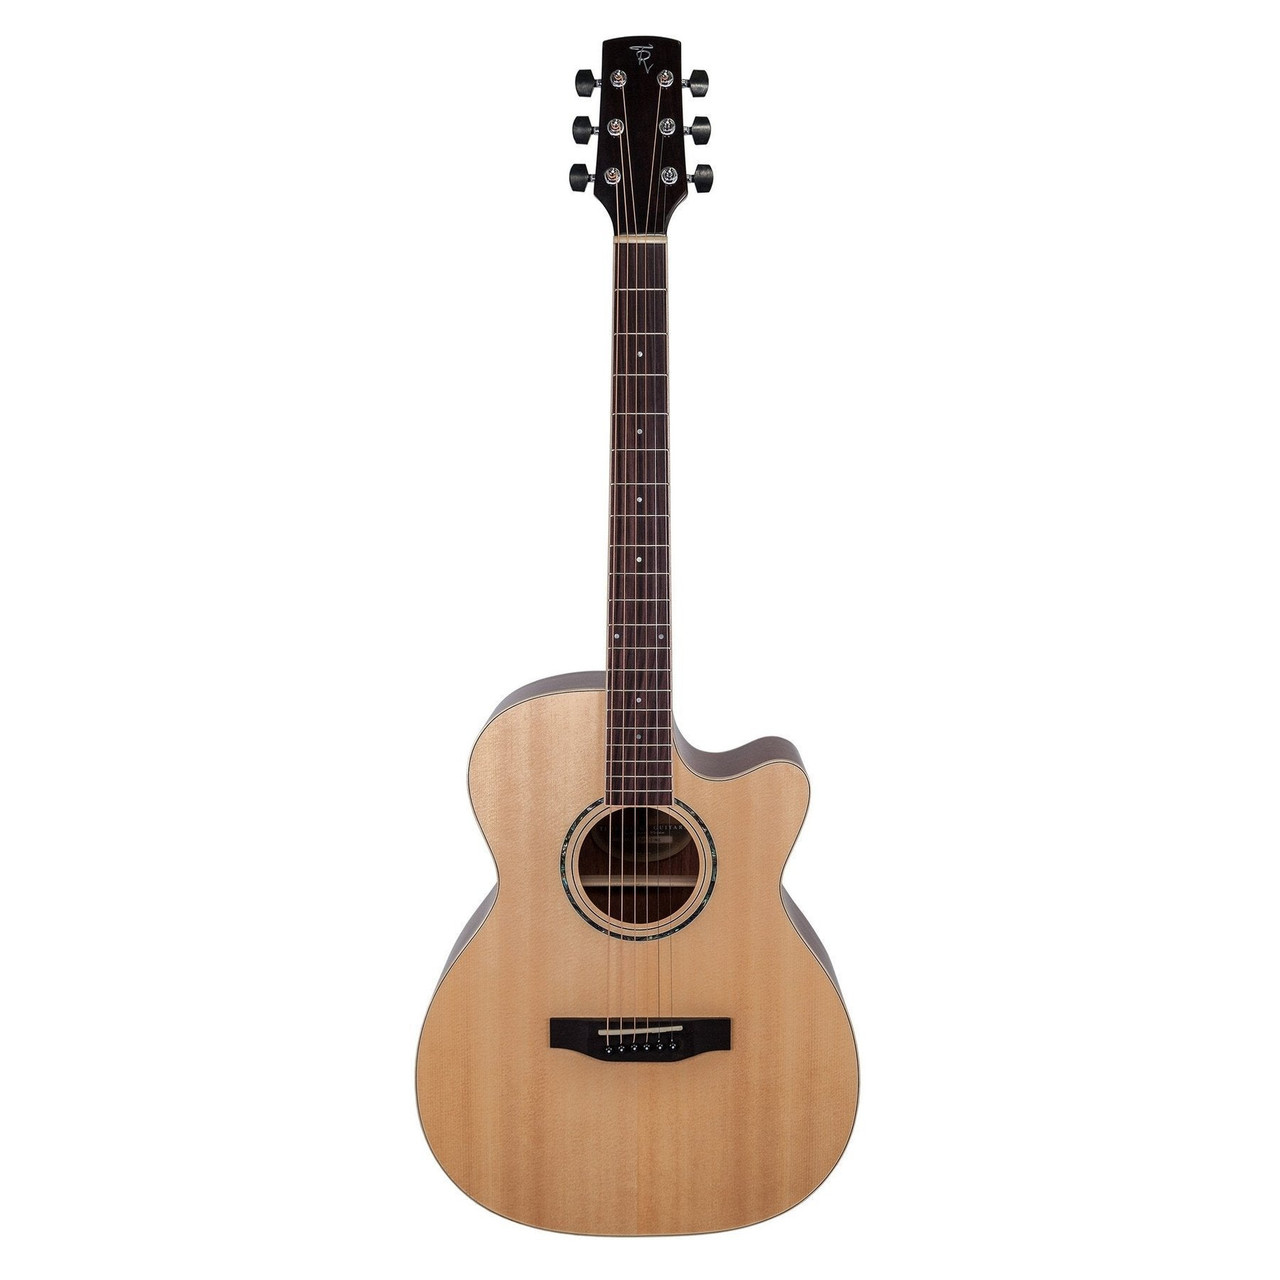 Timberidge '1 Series' Spruce Solid Top Acoustic-Electric Small Body Cutaway Guitar (Natural Gloss) *Includes Brad Clark Pickup